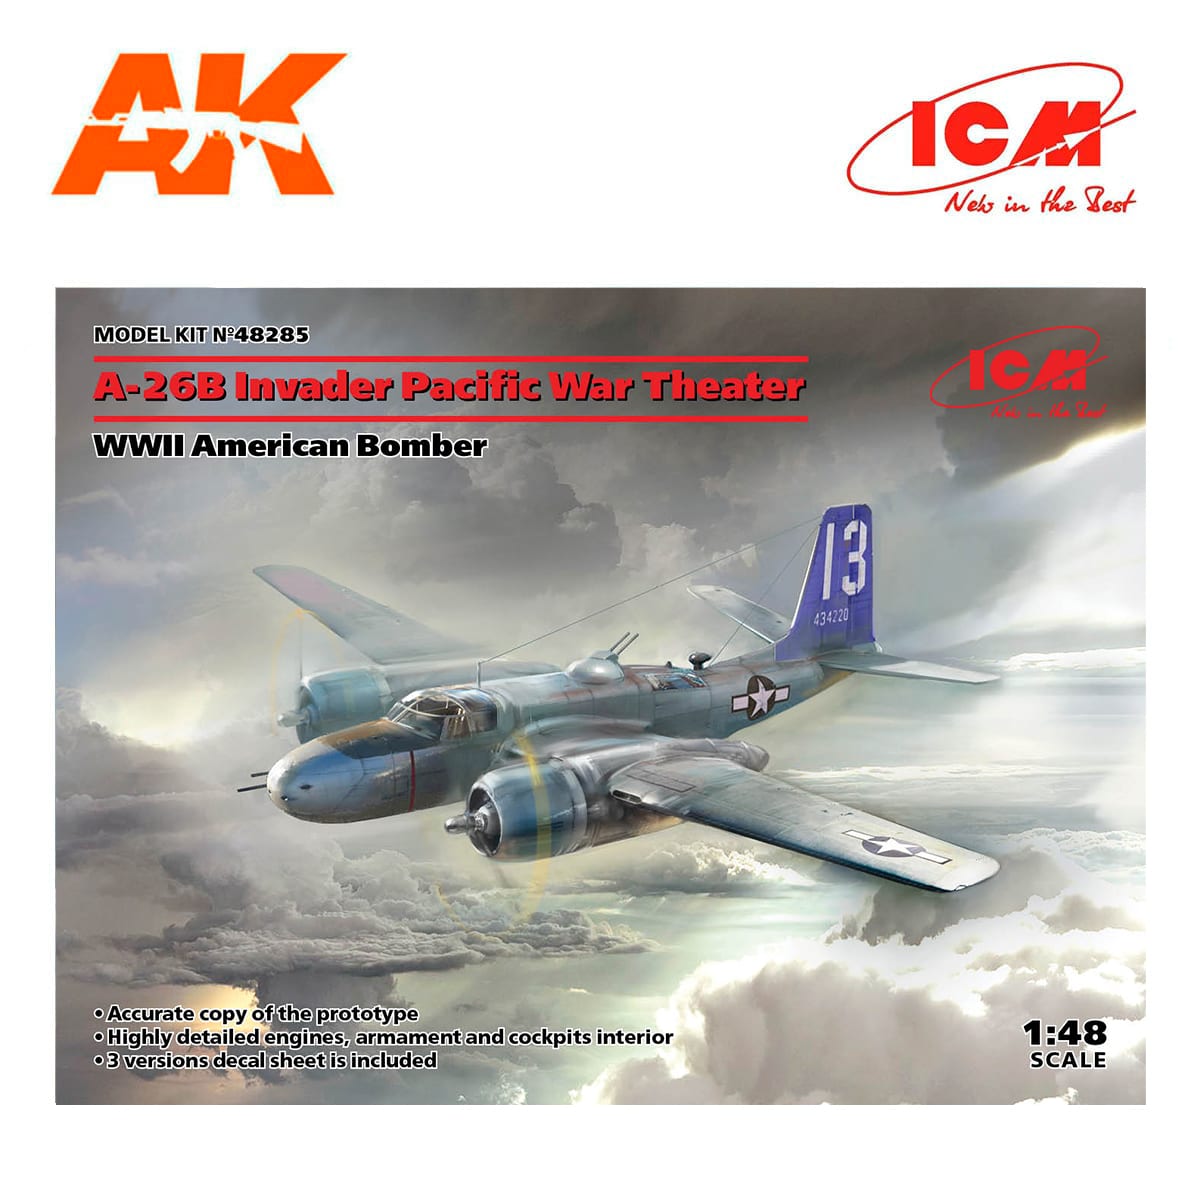 Buy A-26В Invader Pacific War Theater, WWII American Bomber